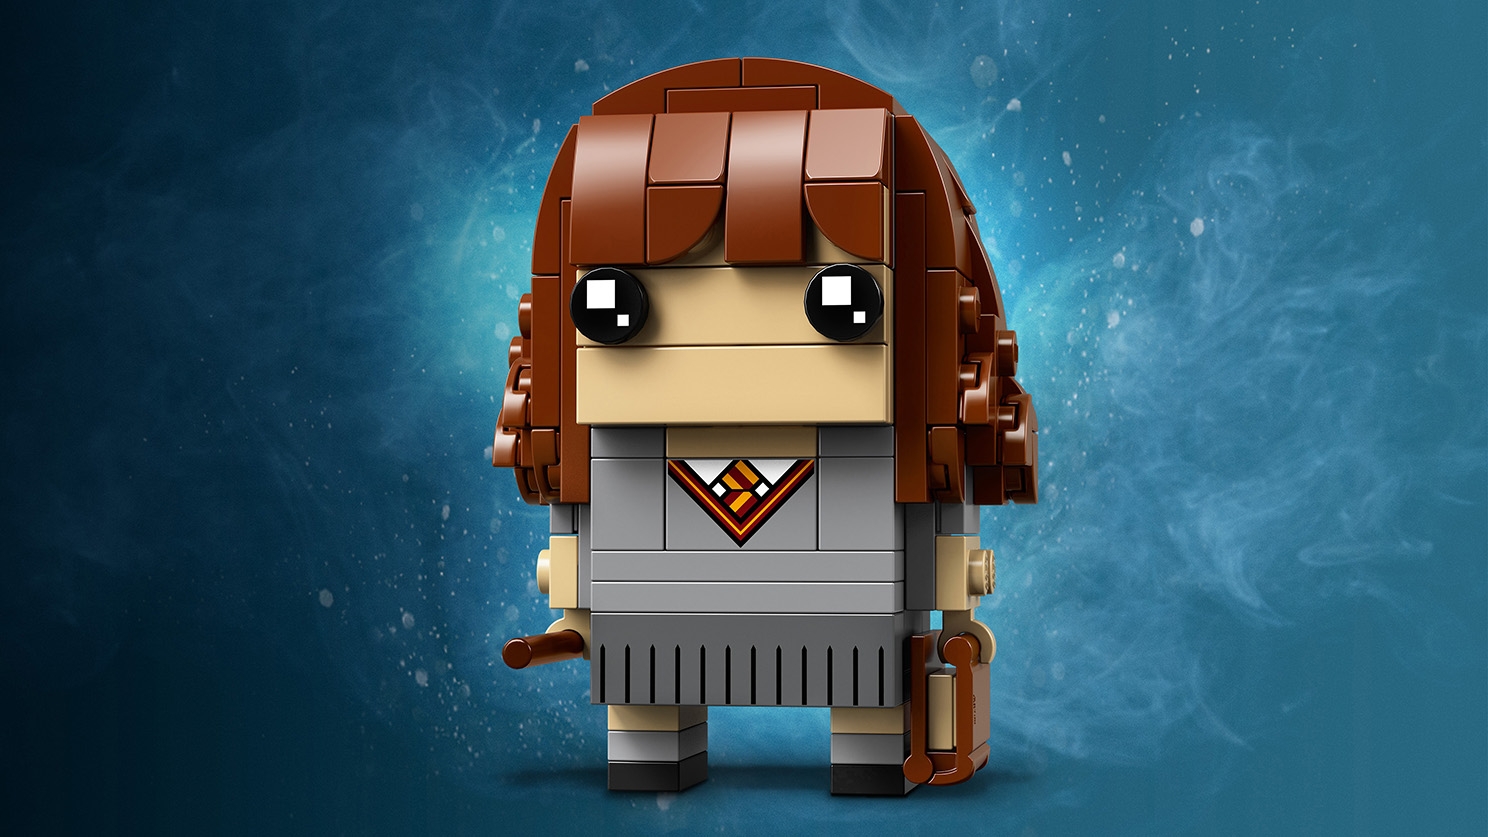 LEGO Brickheadz - 41916 Hermione Granger - Build Hermione Granger in Hogwarts School uniform as in the movie Harry Potter and The Sorcerer's Stone.